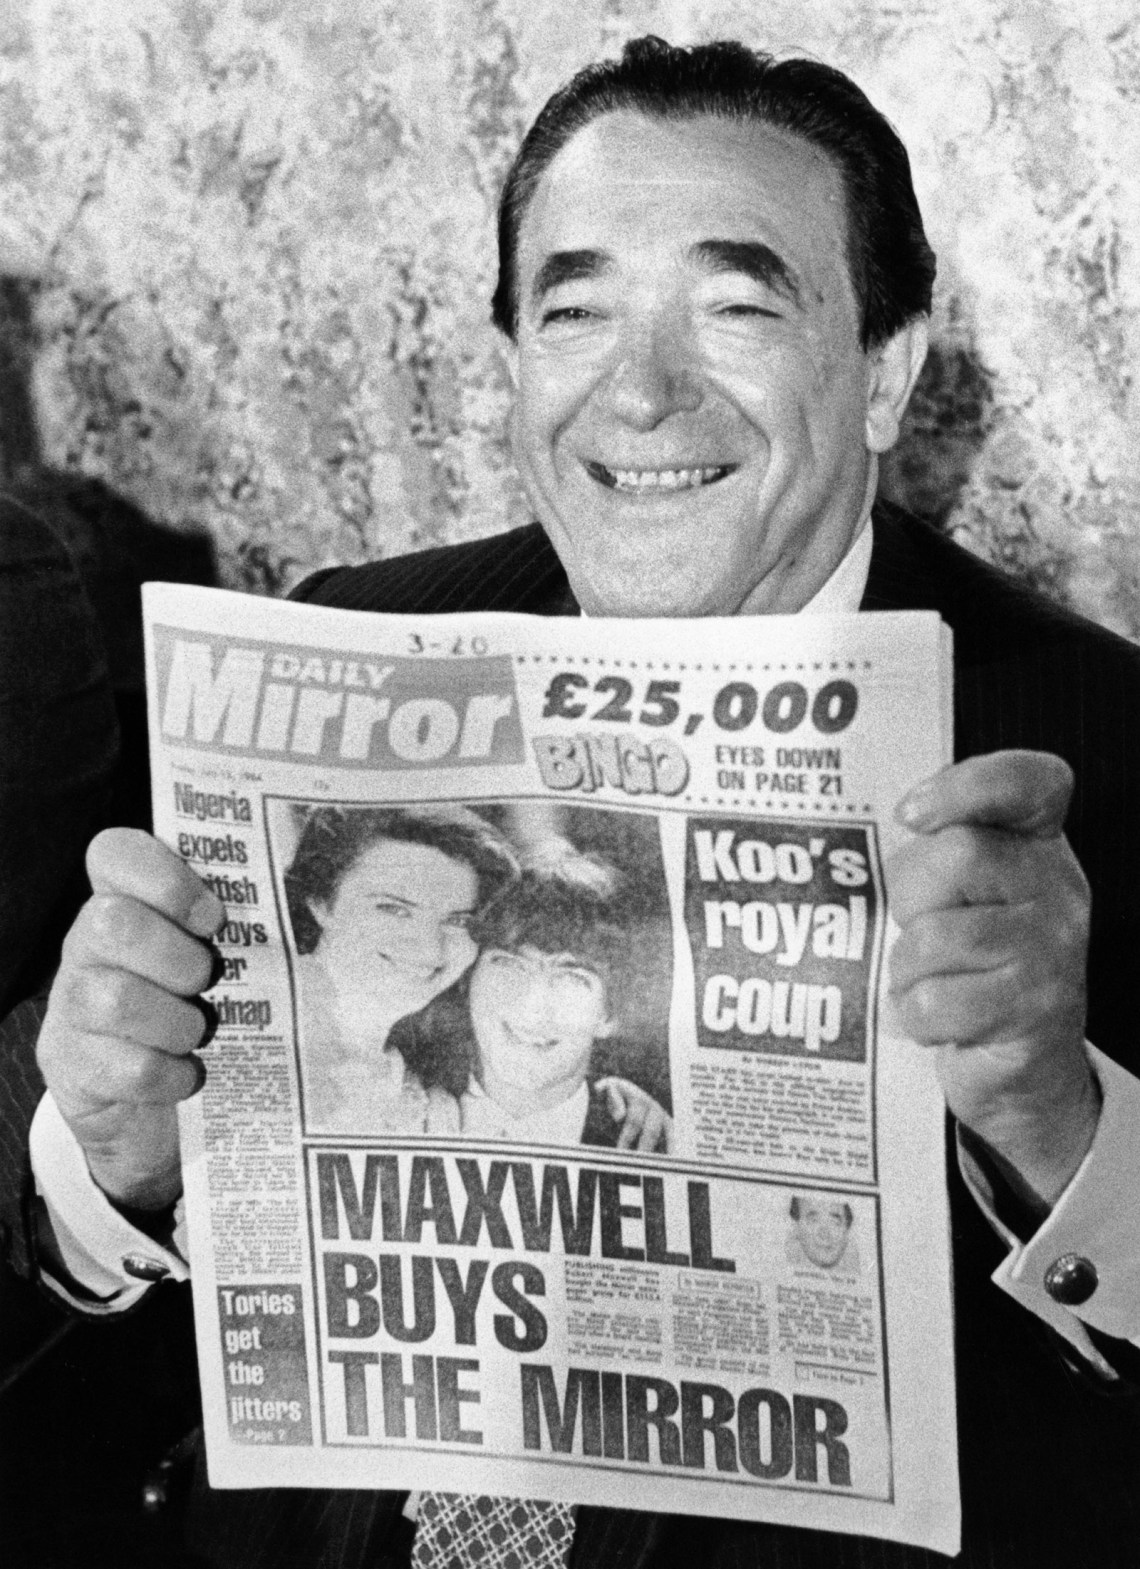 Robert Maxwell announcing his acquisition of Mirror Group Newspapers